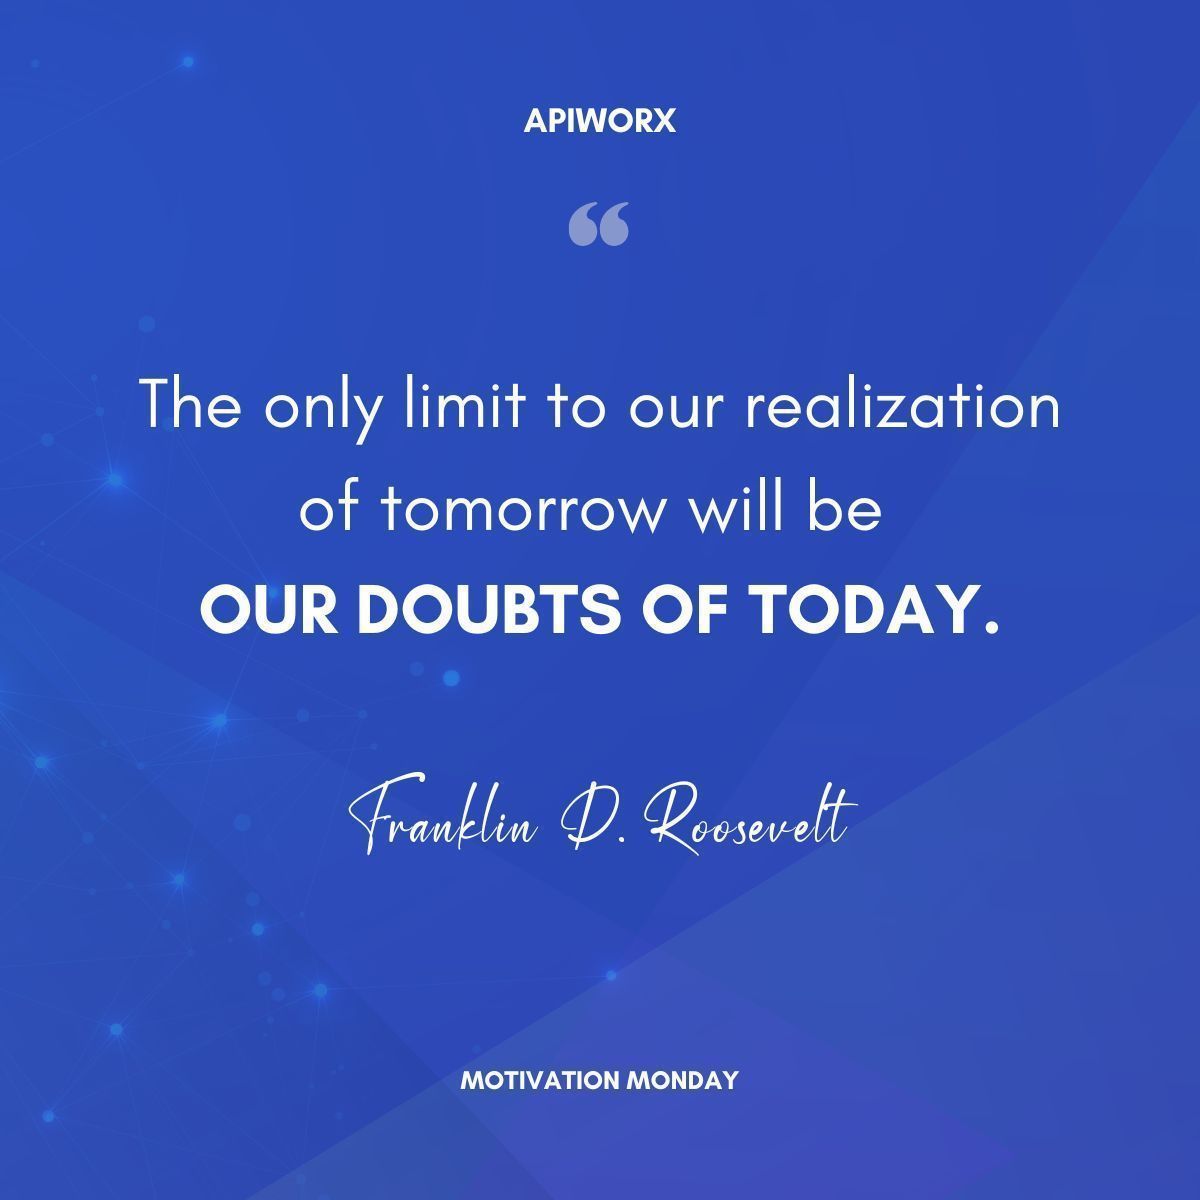 Let's leave our doubts behind and step into a limitless tomorrow. 🚀 

#DreamBig #FutureFocused #InnovationInspiration #Apiworx #BreakTheBoundaries #LimitlessLiving #EmpowermentEveryday #SuccessStartsNow #GoalGetter #AmbitionInAction #TechTrendsetter #MondayMindset